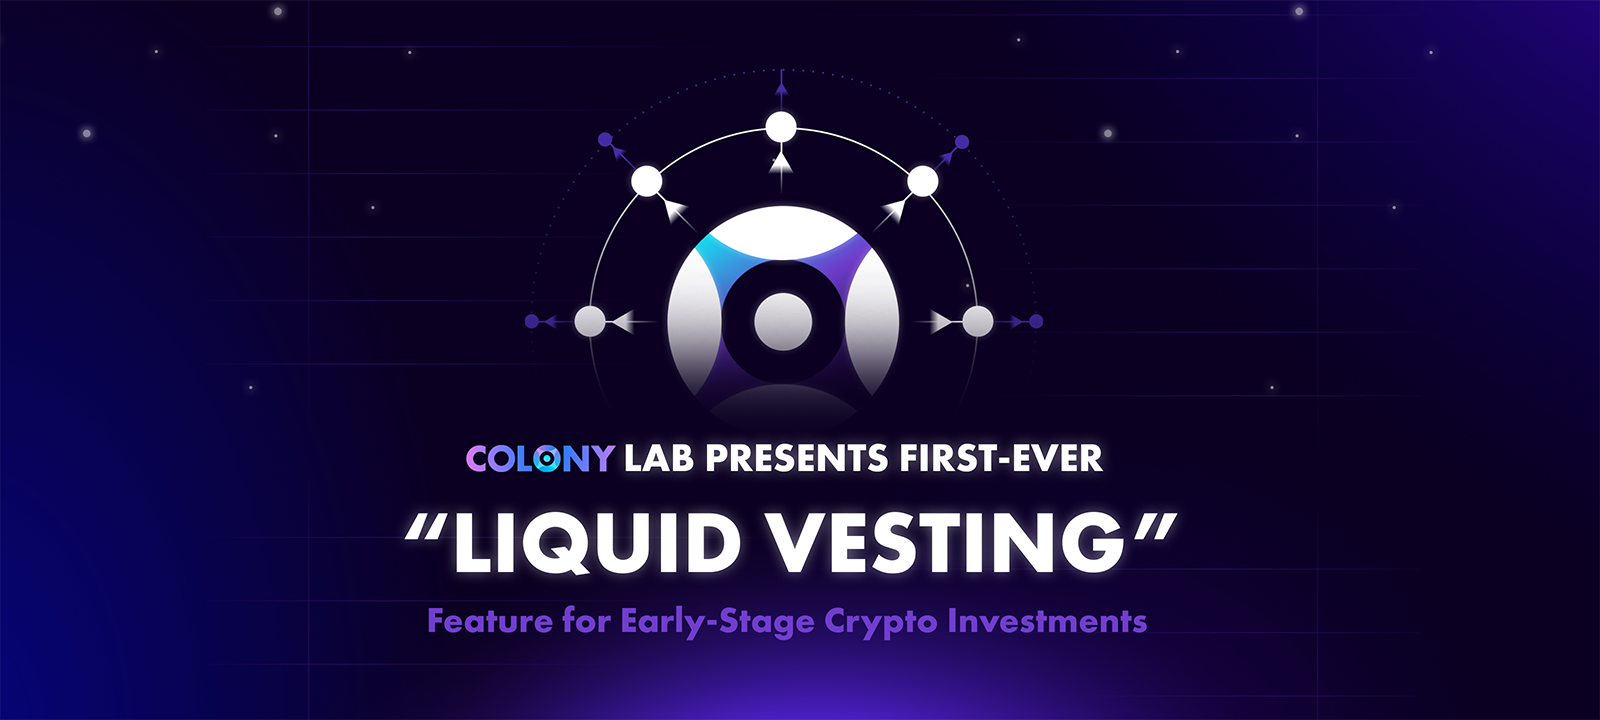 Colony Lab Launches Revolutionary Fundraising Platform with Innovative ‘Liquid Vesting’ Feature